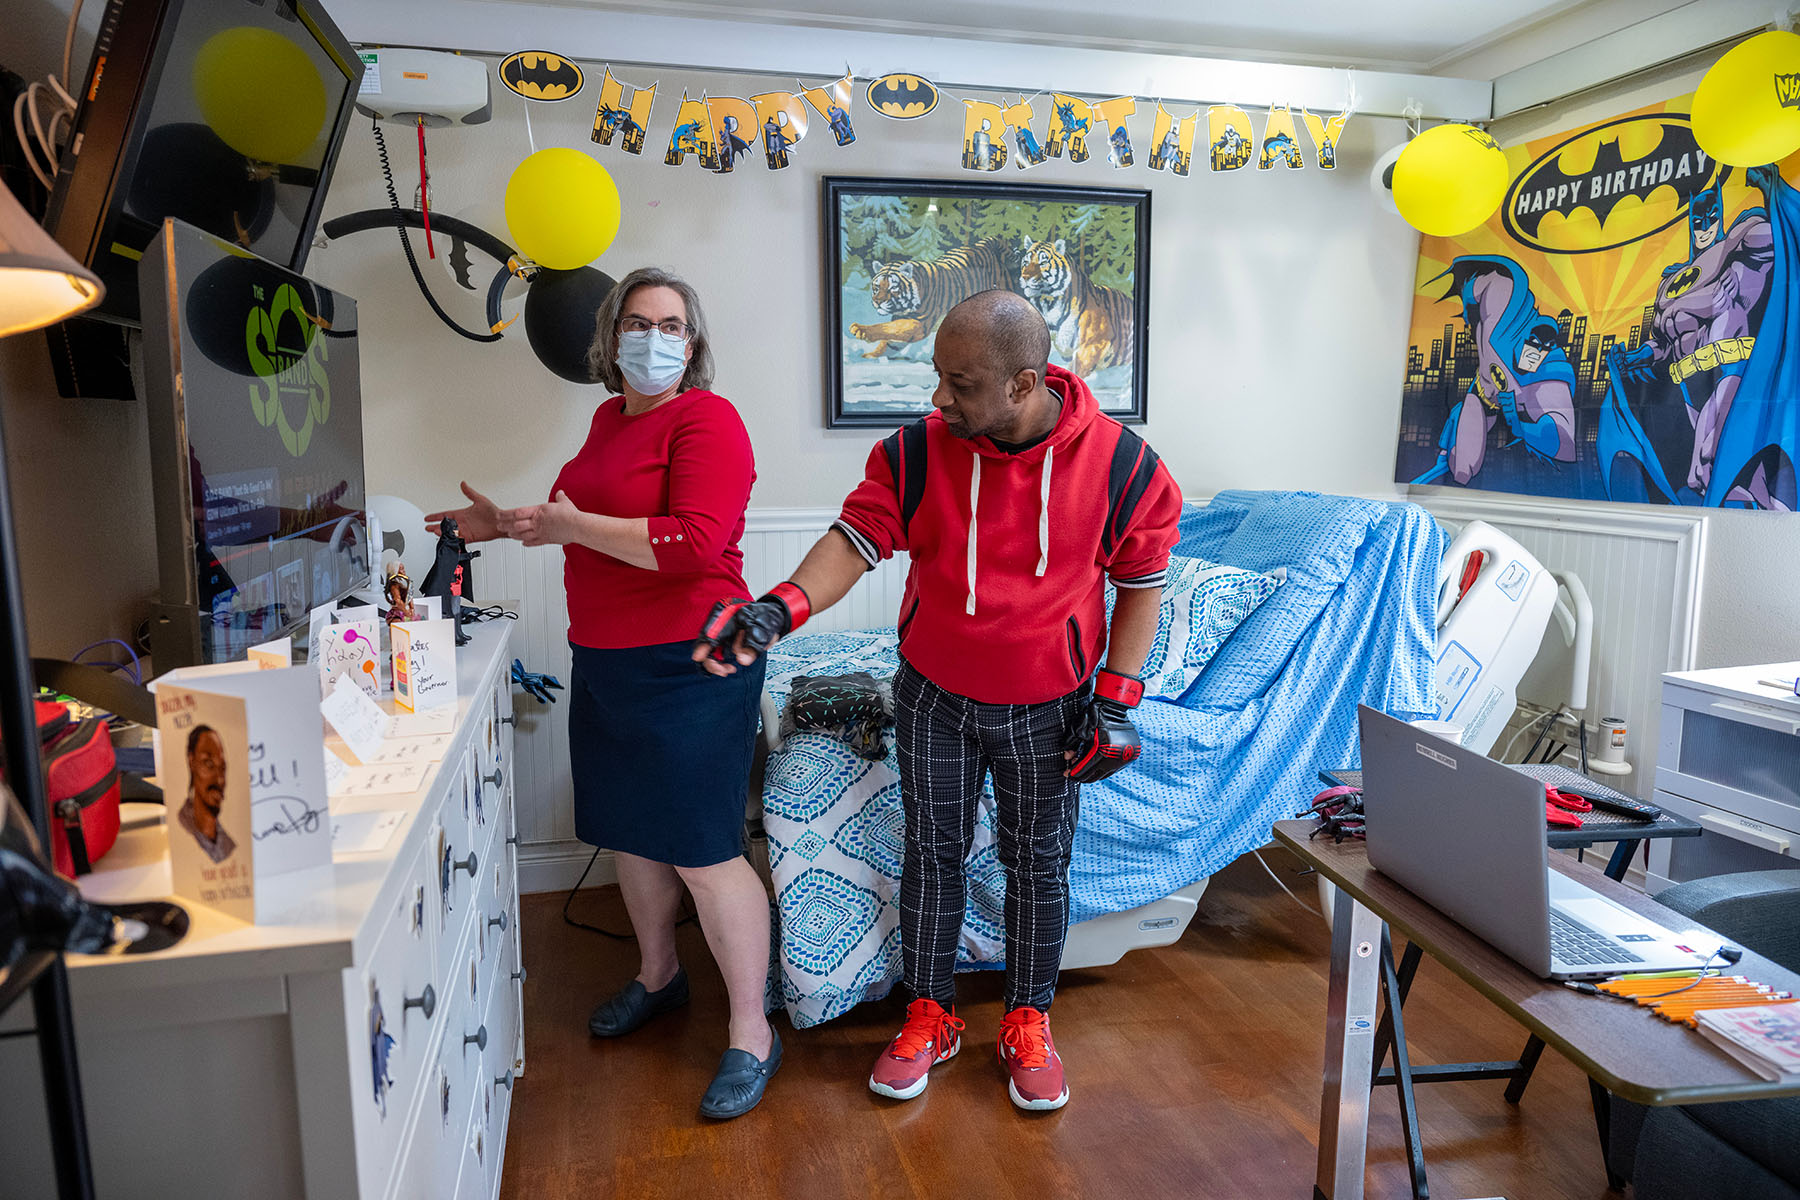 Clarissa Kripke checks in on her patient Russell Hughes in his home bedroom, where there's a hospital bed along with personal Spider Man-themed decorations